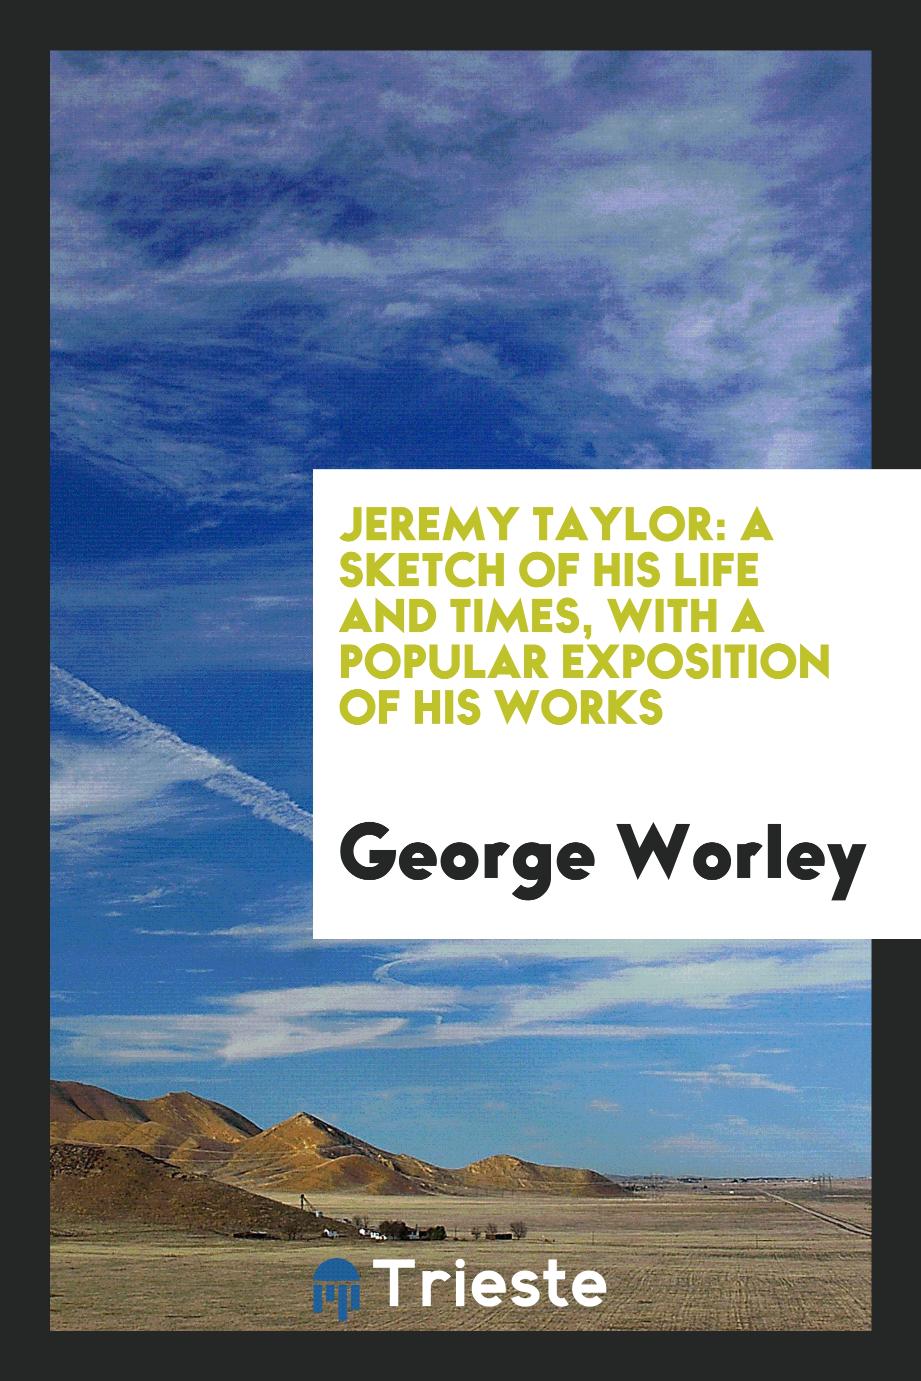 Jeremy Taylor: a sketch of his life and times, with a popular exposition of his works